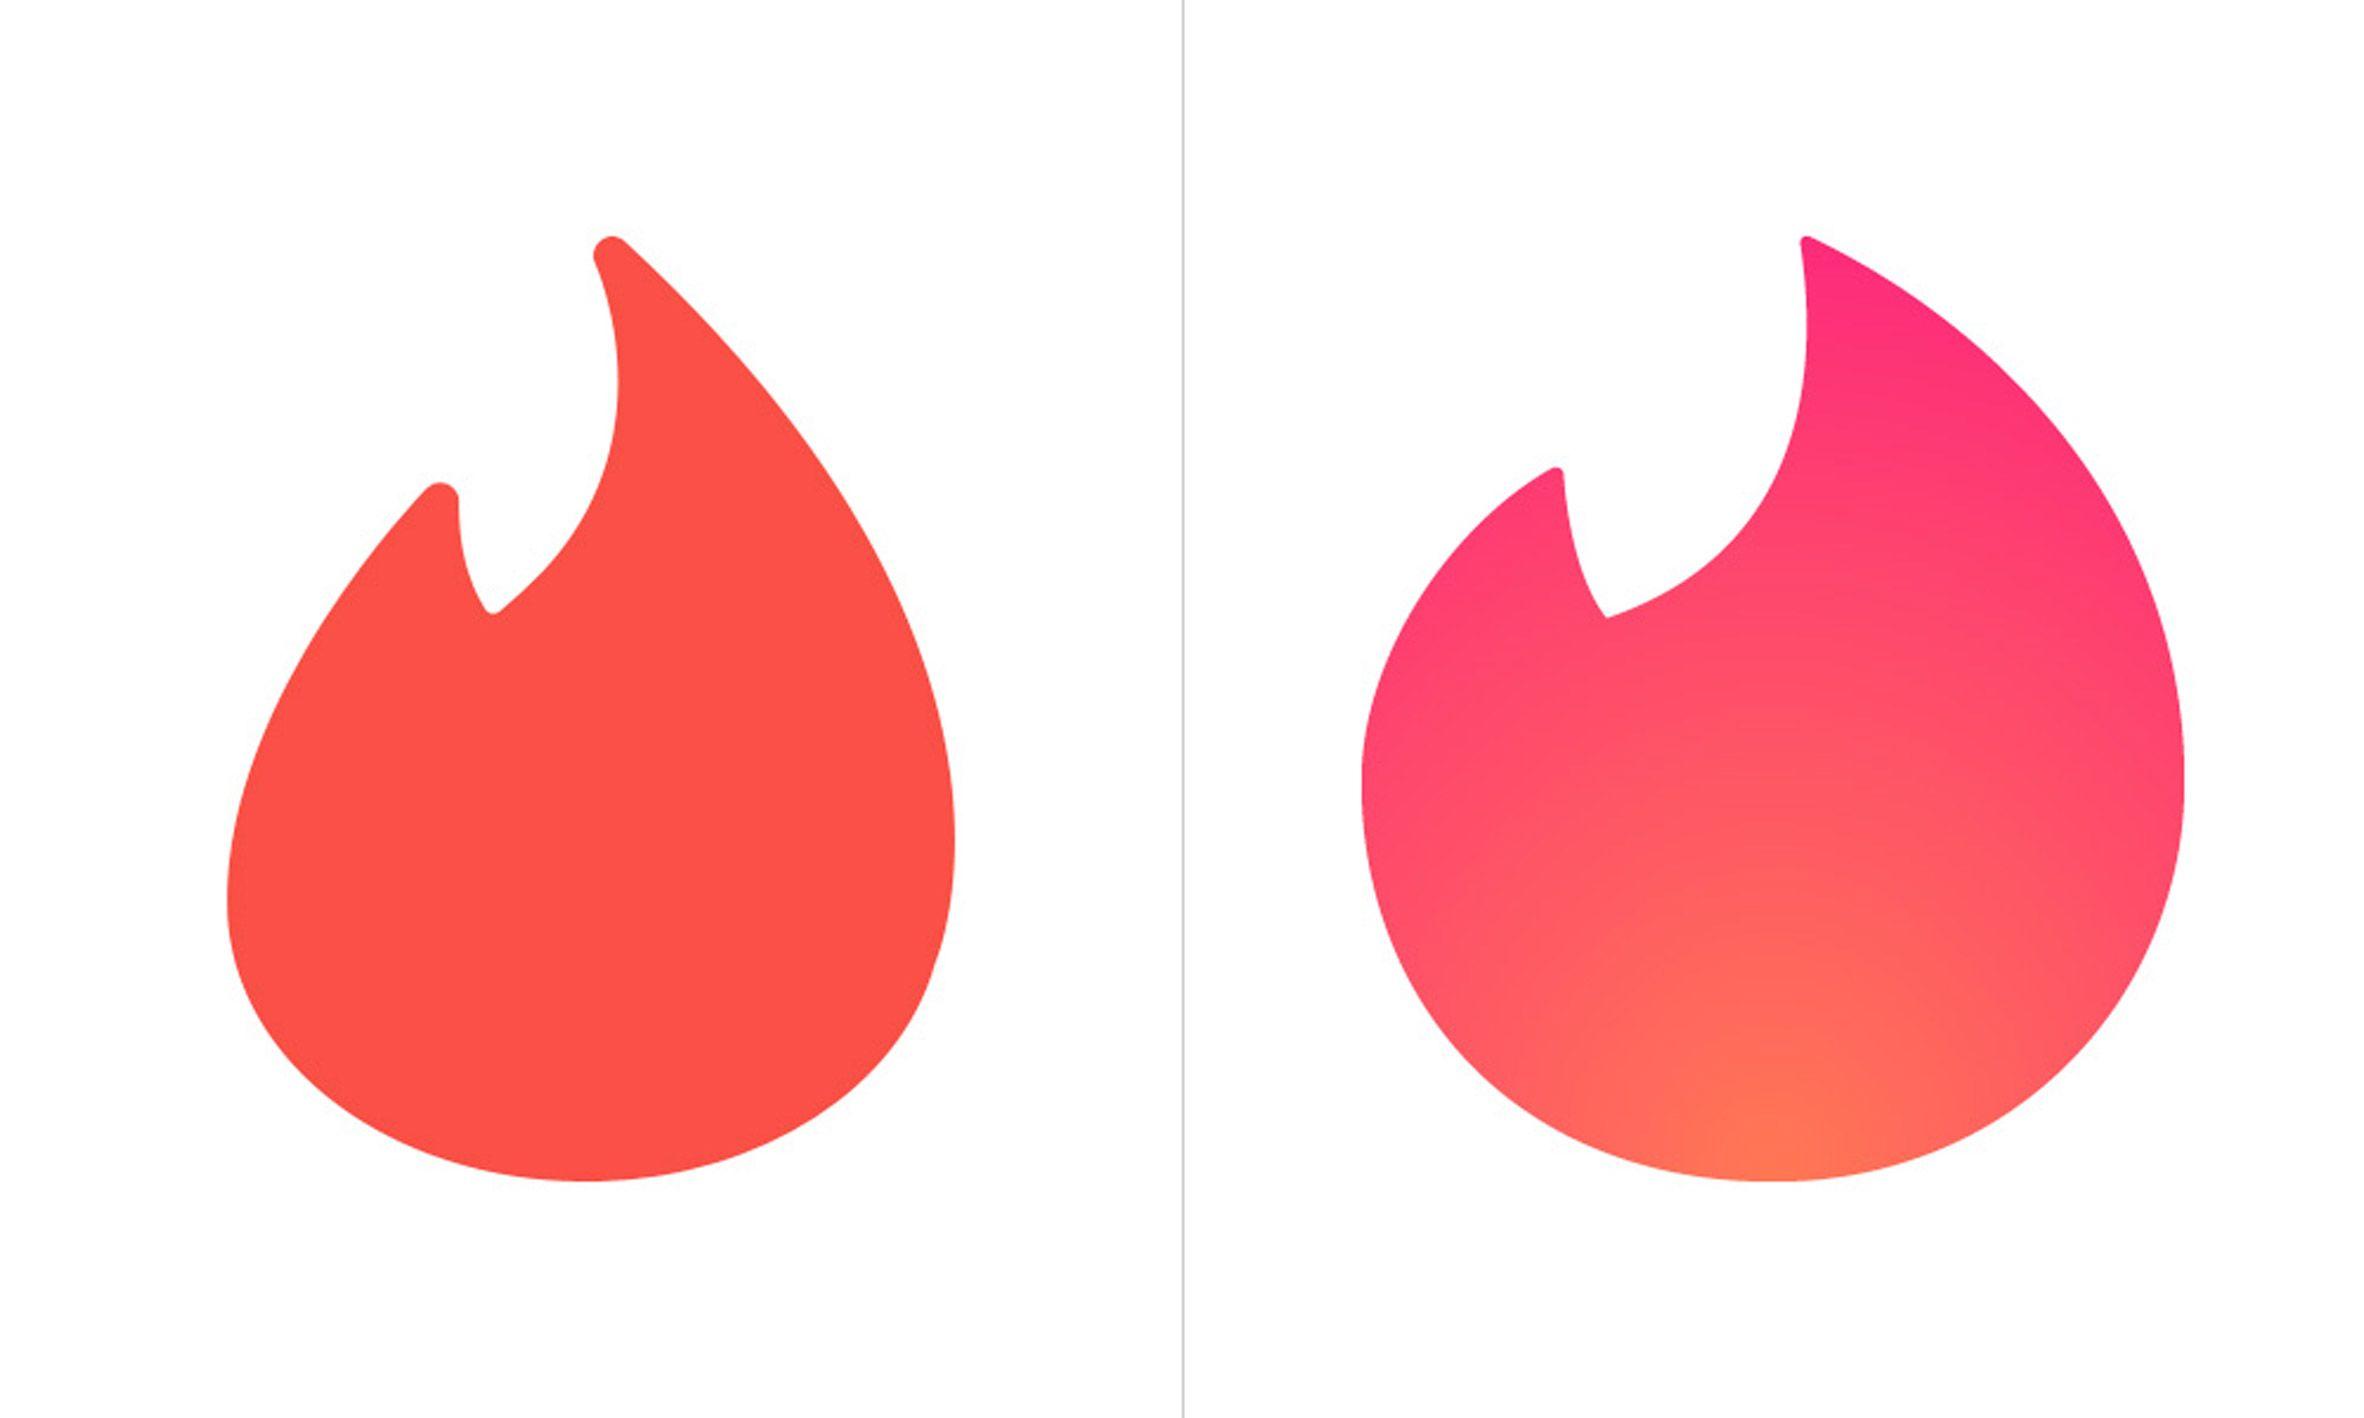 Side Flame Logo - Tinder replaces wordmark with pink and orange flame logo